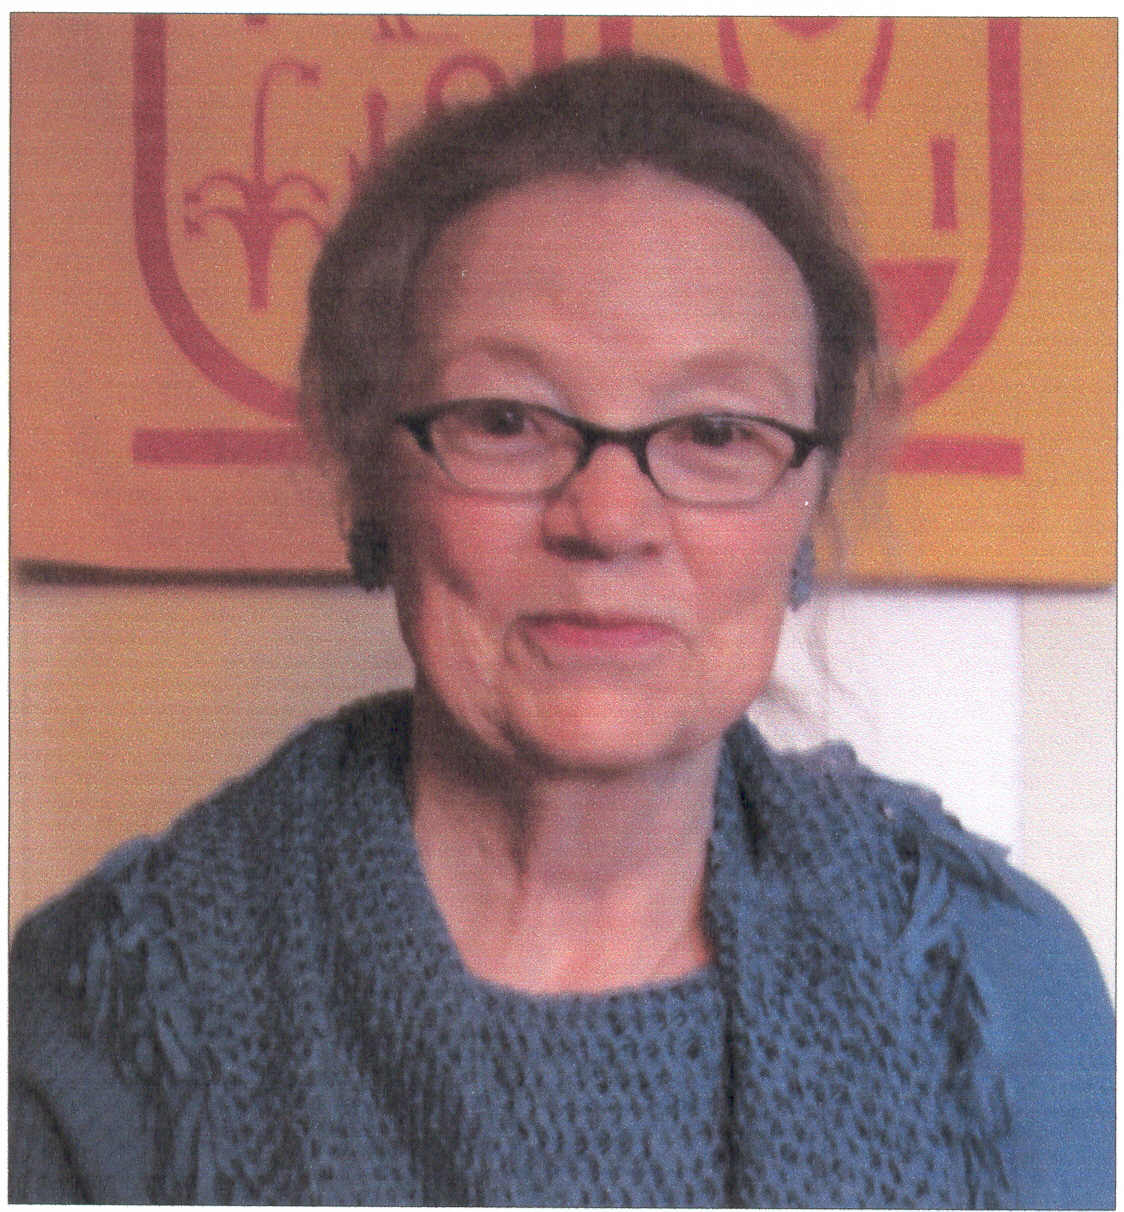 Author of 'Clancy and the Bear Dance.''The Out-of-Body Travel Foundation's' Marilynn Hughes published her work after she had spent a lifetime counseling kids.